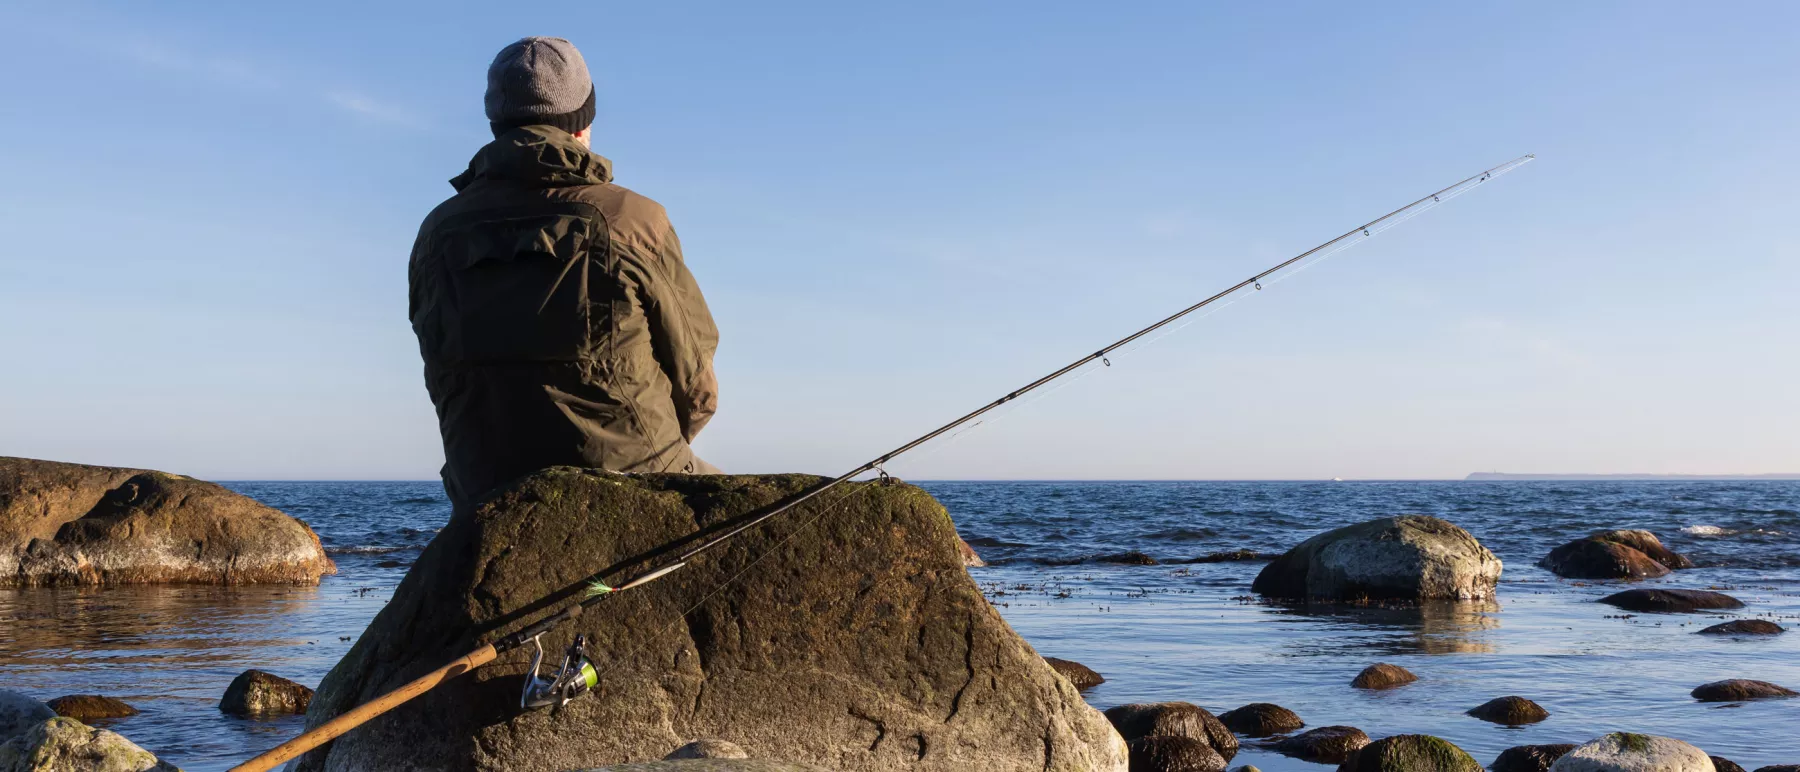 Angler sat with their fishing rod on rocks close to the water